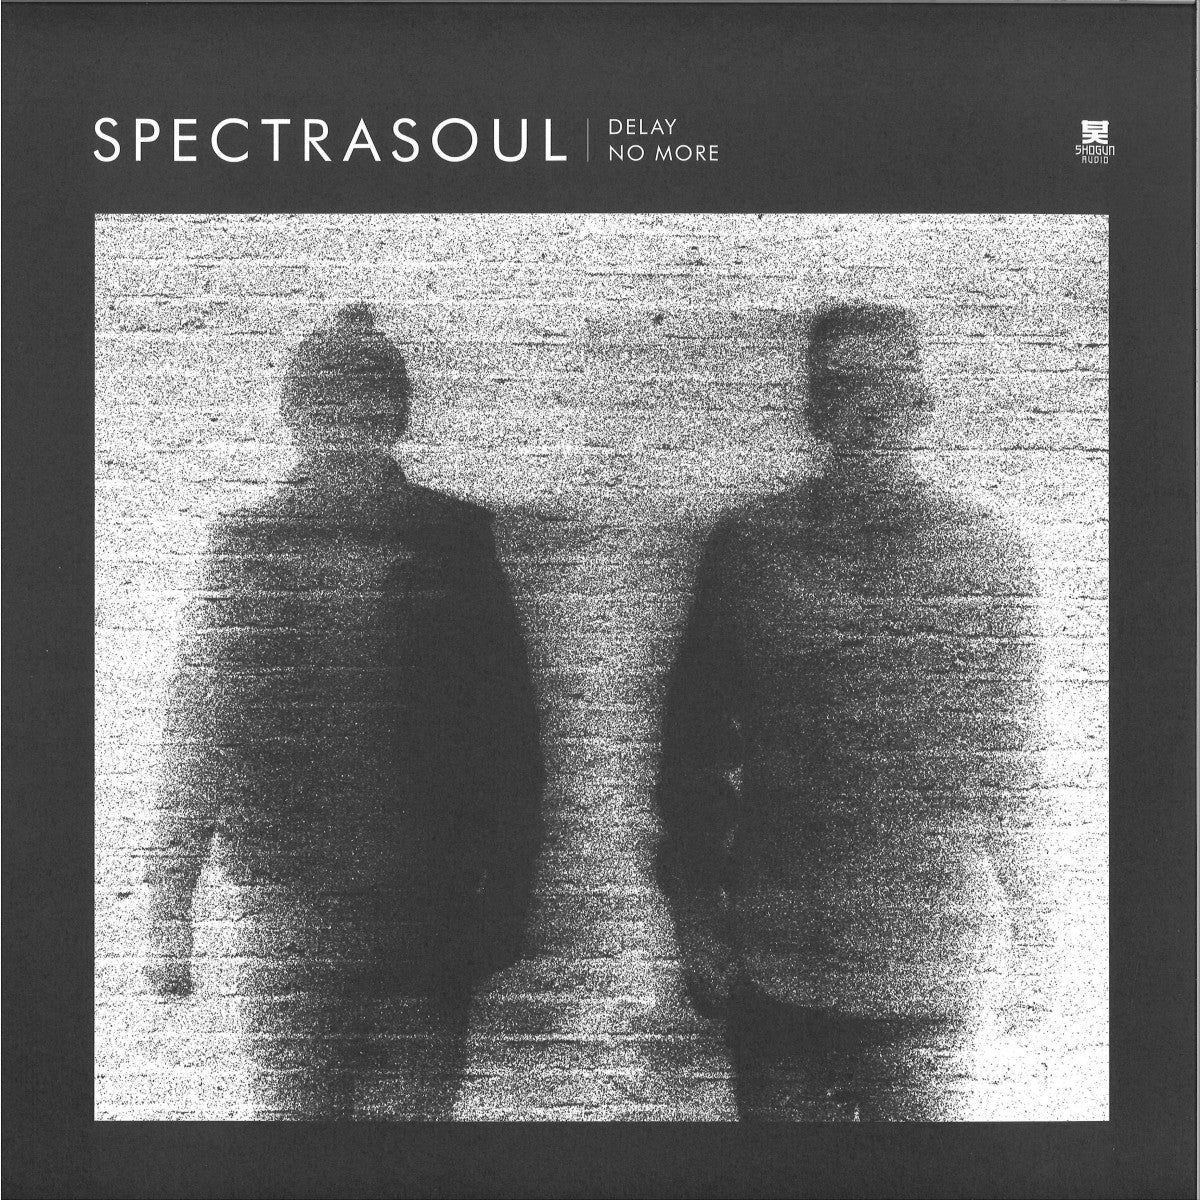 SPECTRASOUL 'DELAY NO MORE (10 YEARS EDITION)' 2LP